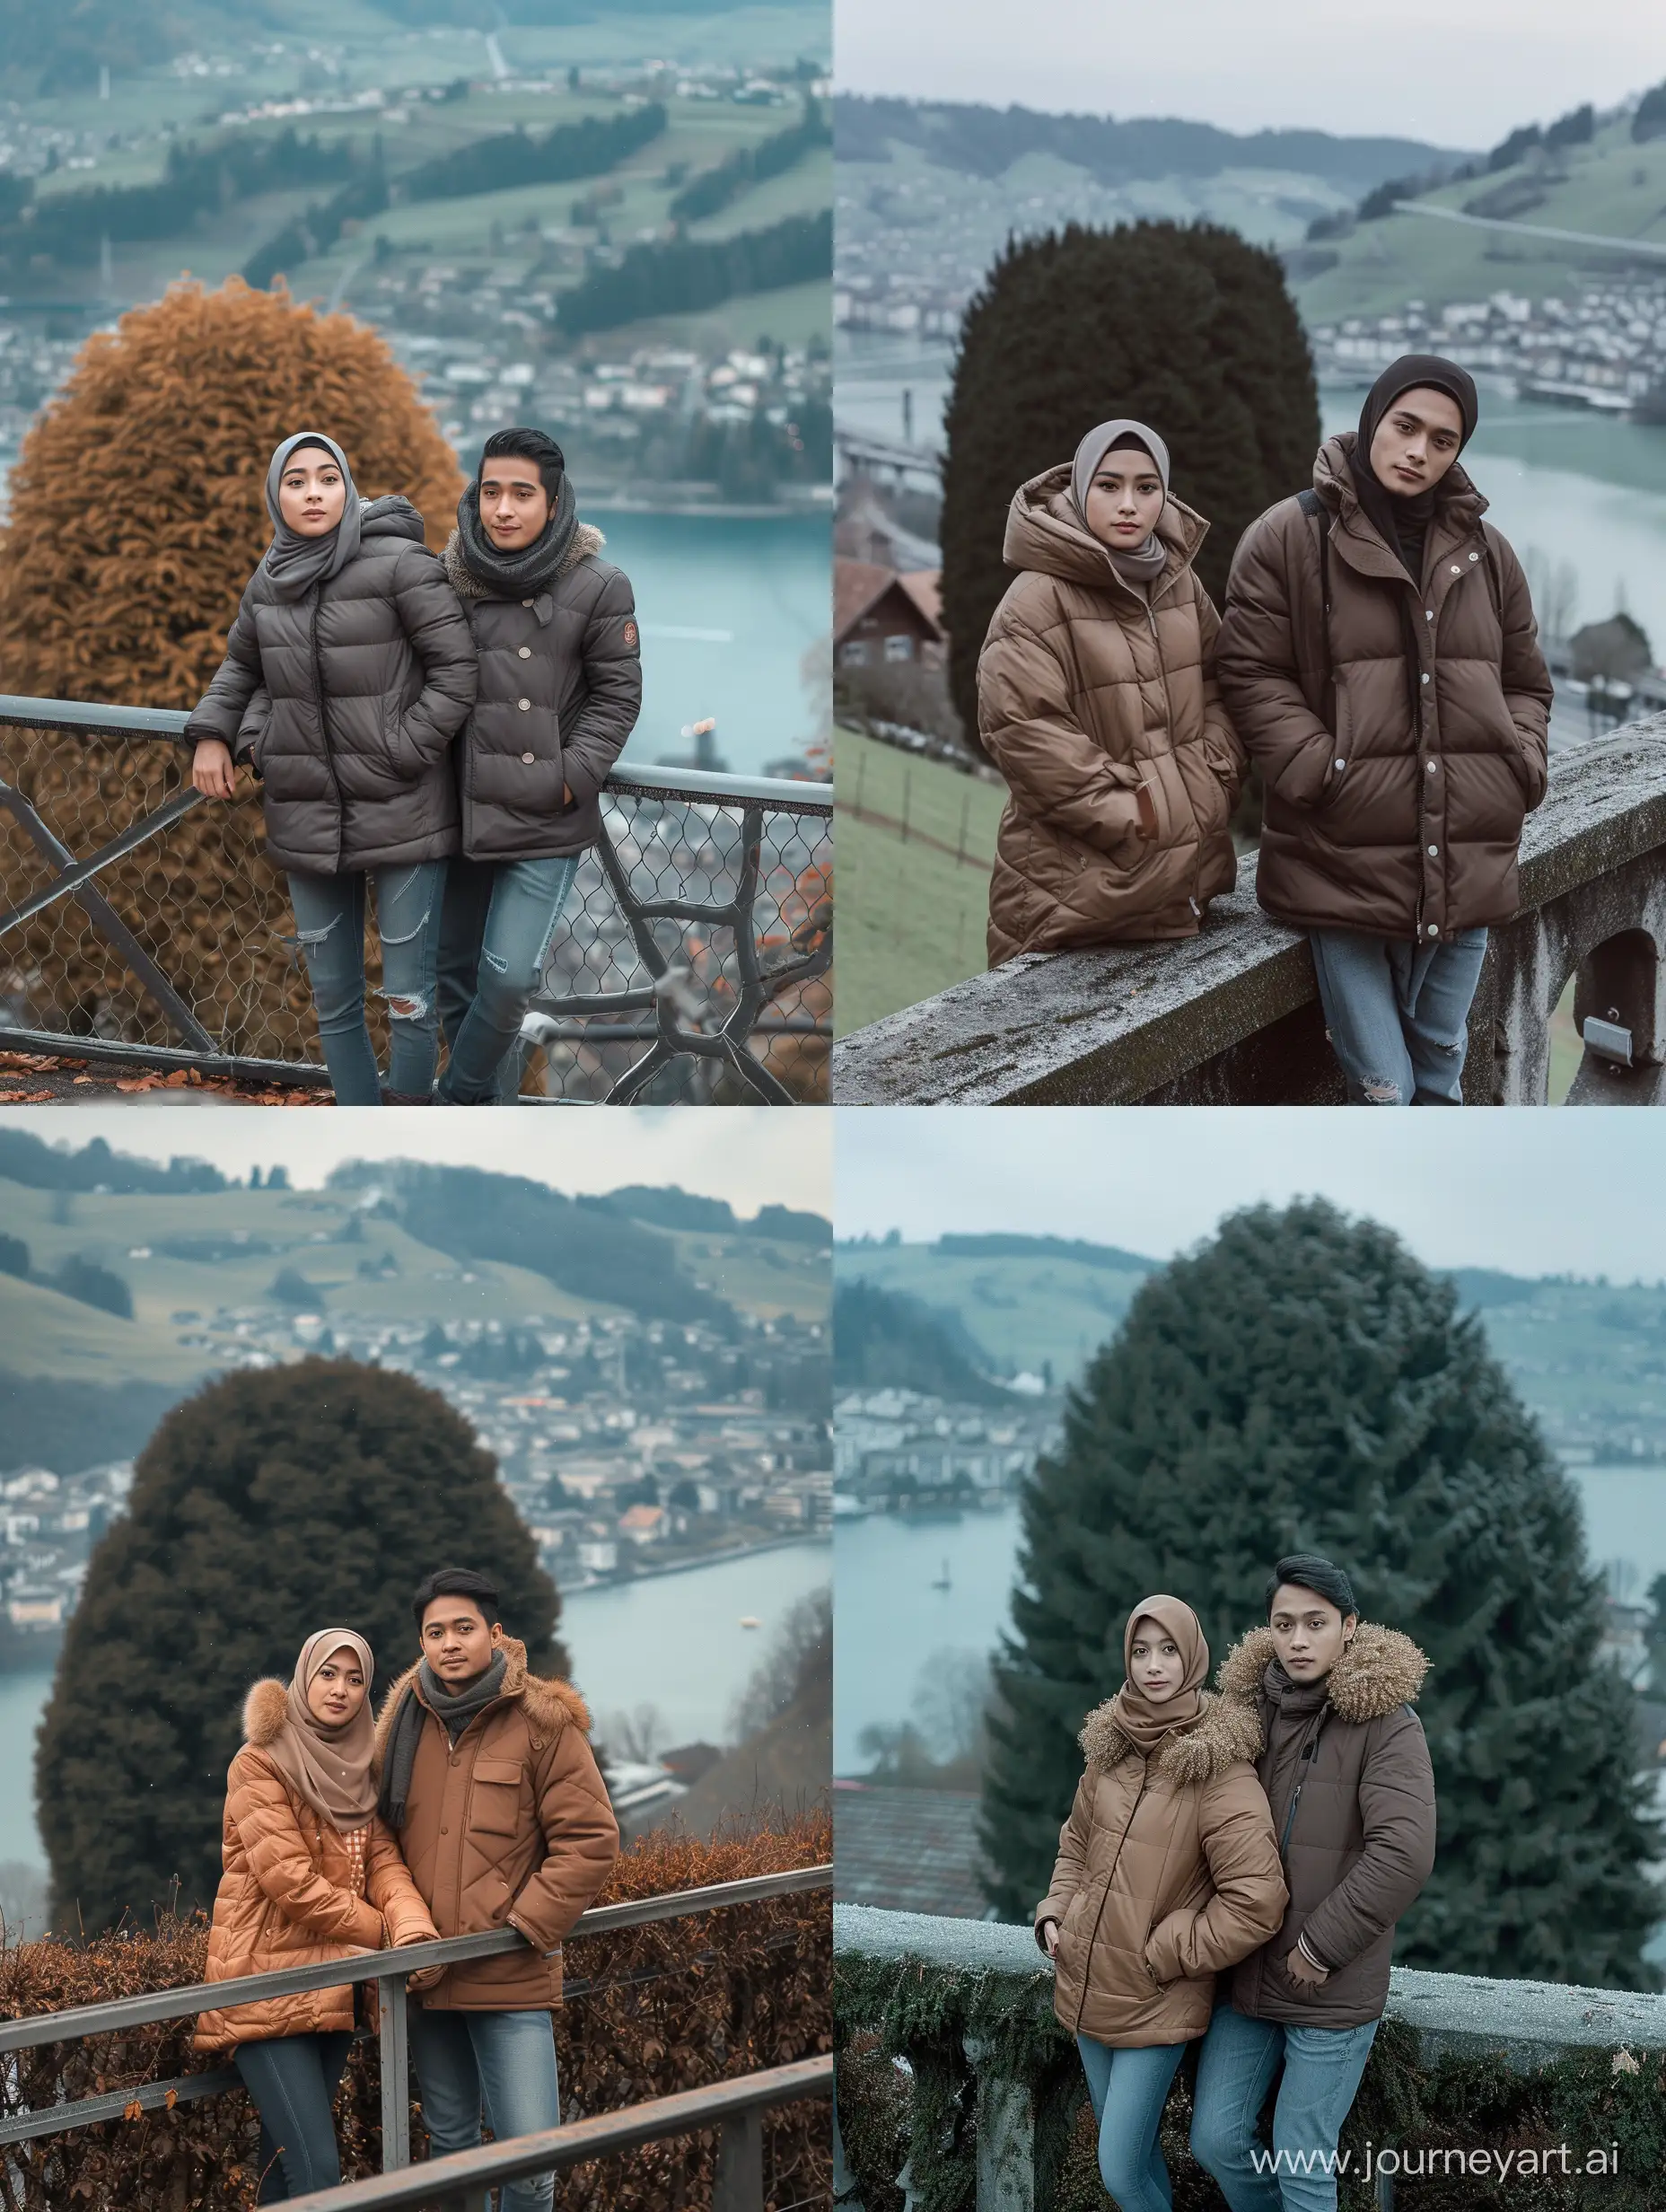 Javanese-Indonesian-Couple-in-Hijabs-Posing-on-Swiss-Bridge-with-Scenic-View